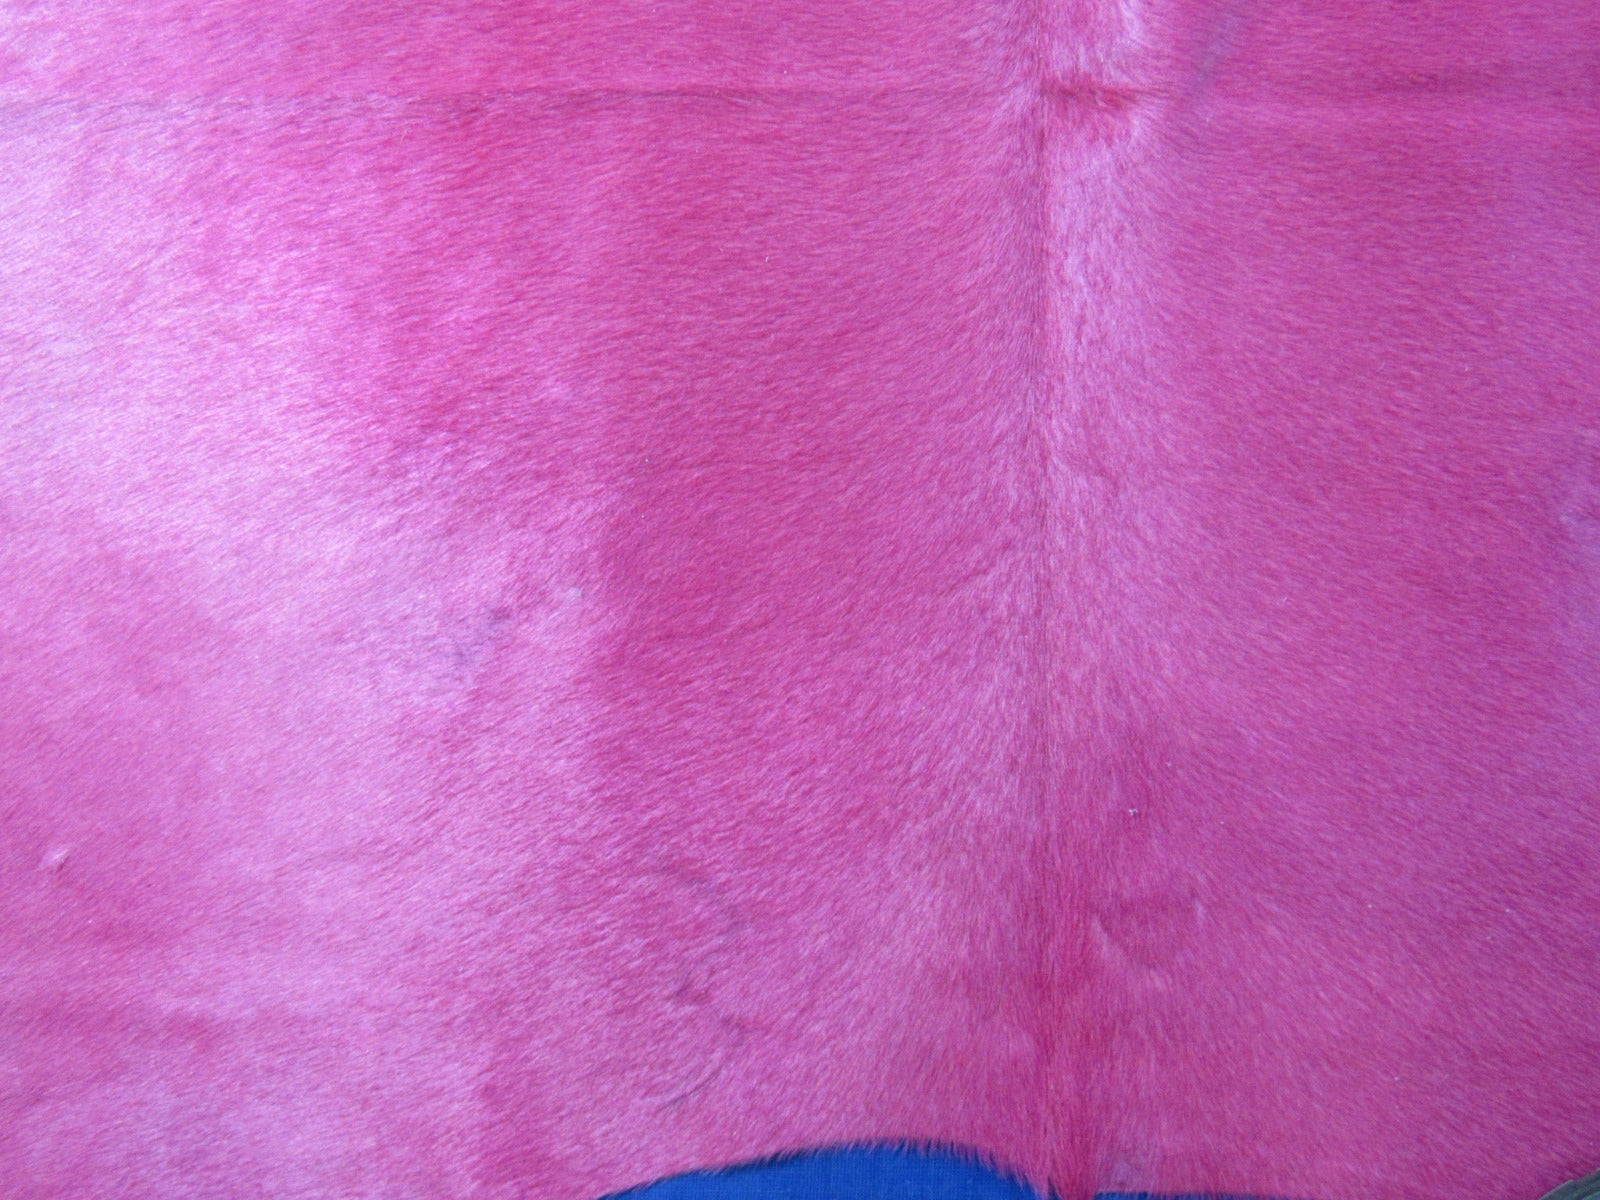 Dyed Pink Cowhide Rug - Size: 7.5x6.5 feet C-1745